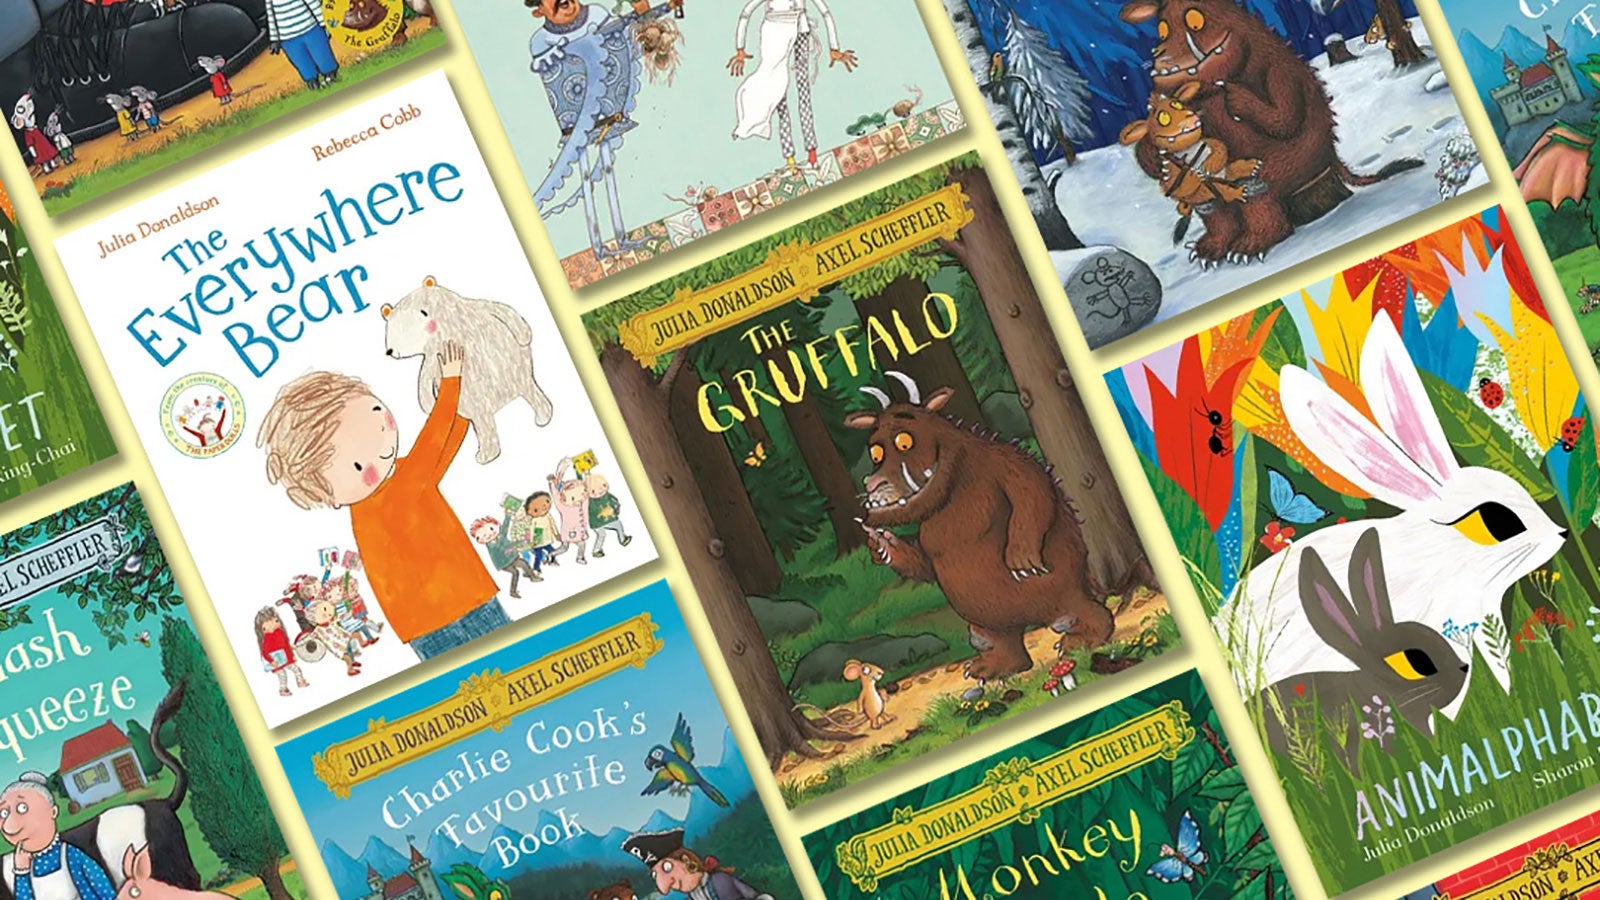 A selection of Julia Donaldson's children's books arranged in a pattern against a yellow background